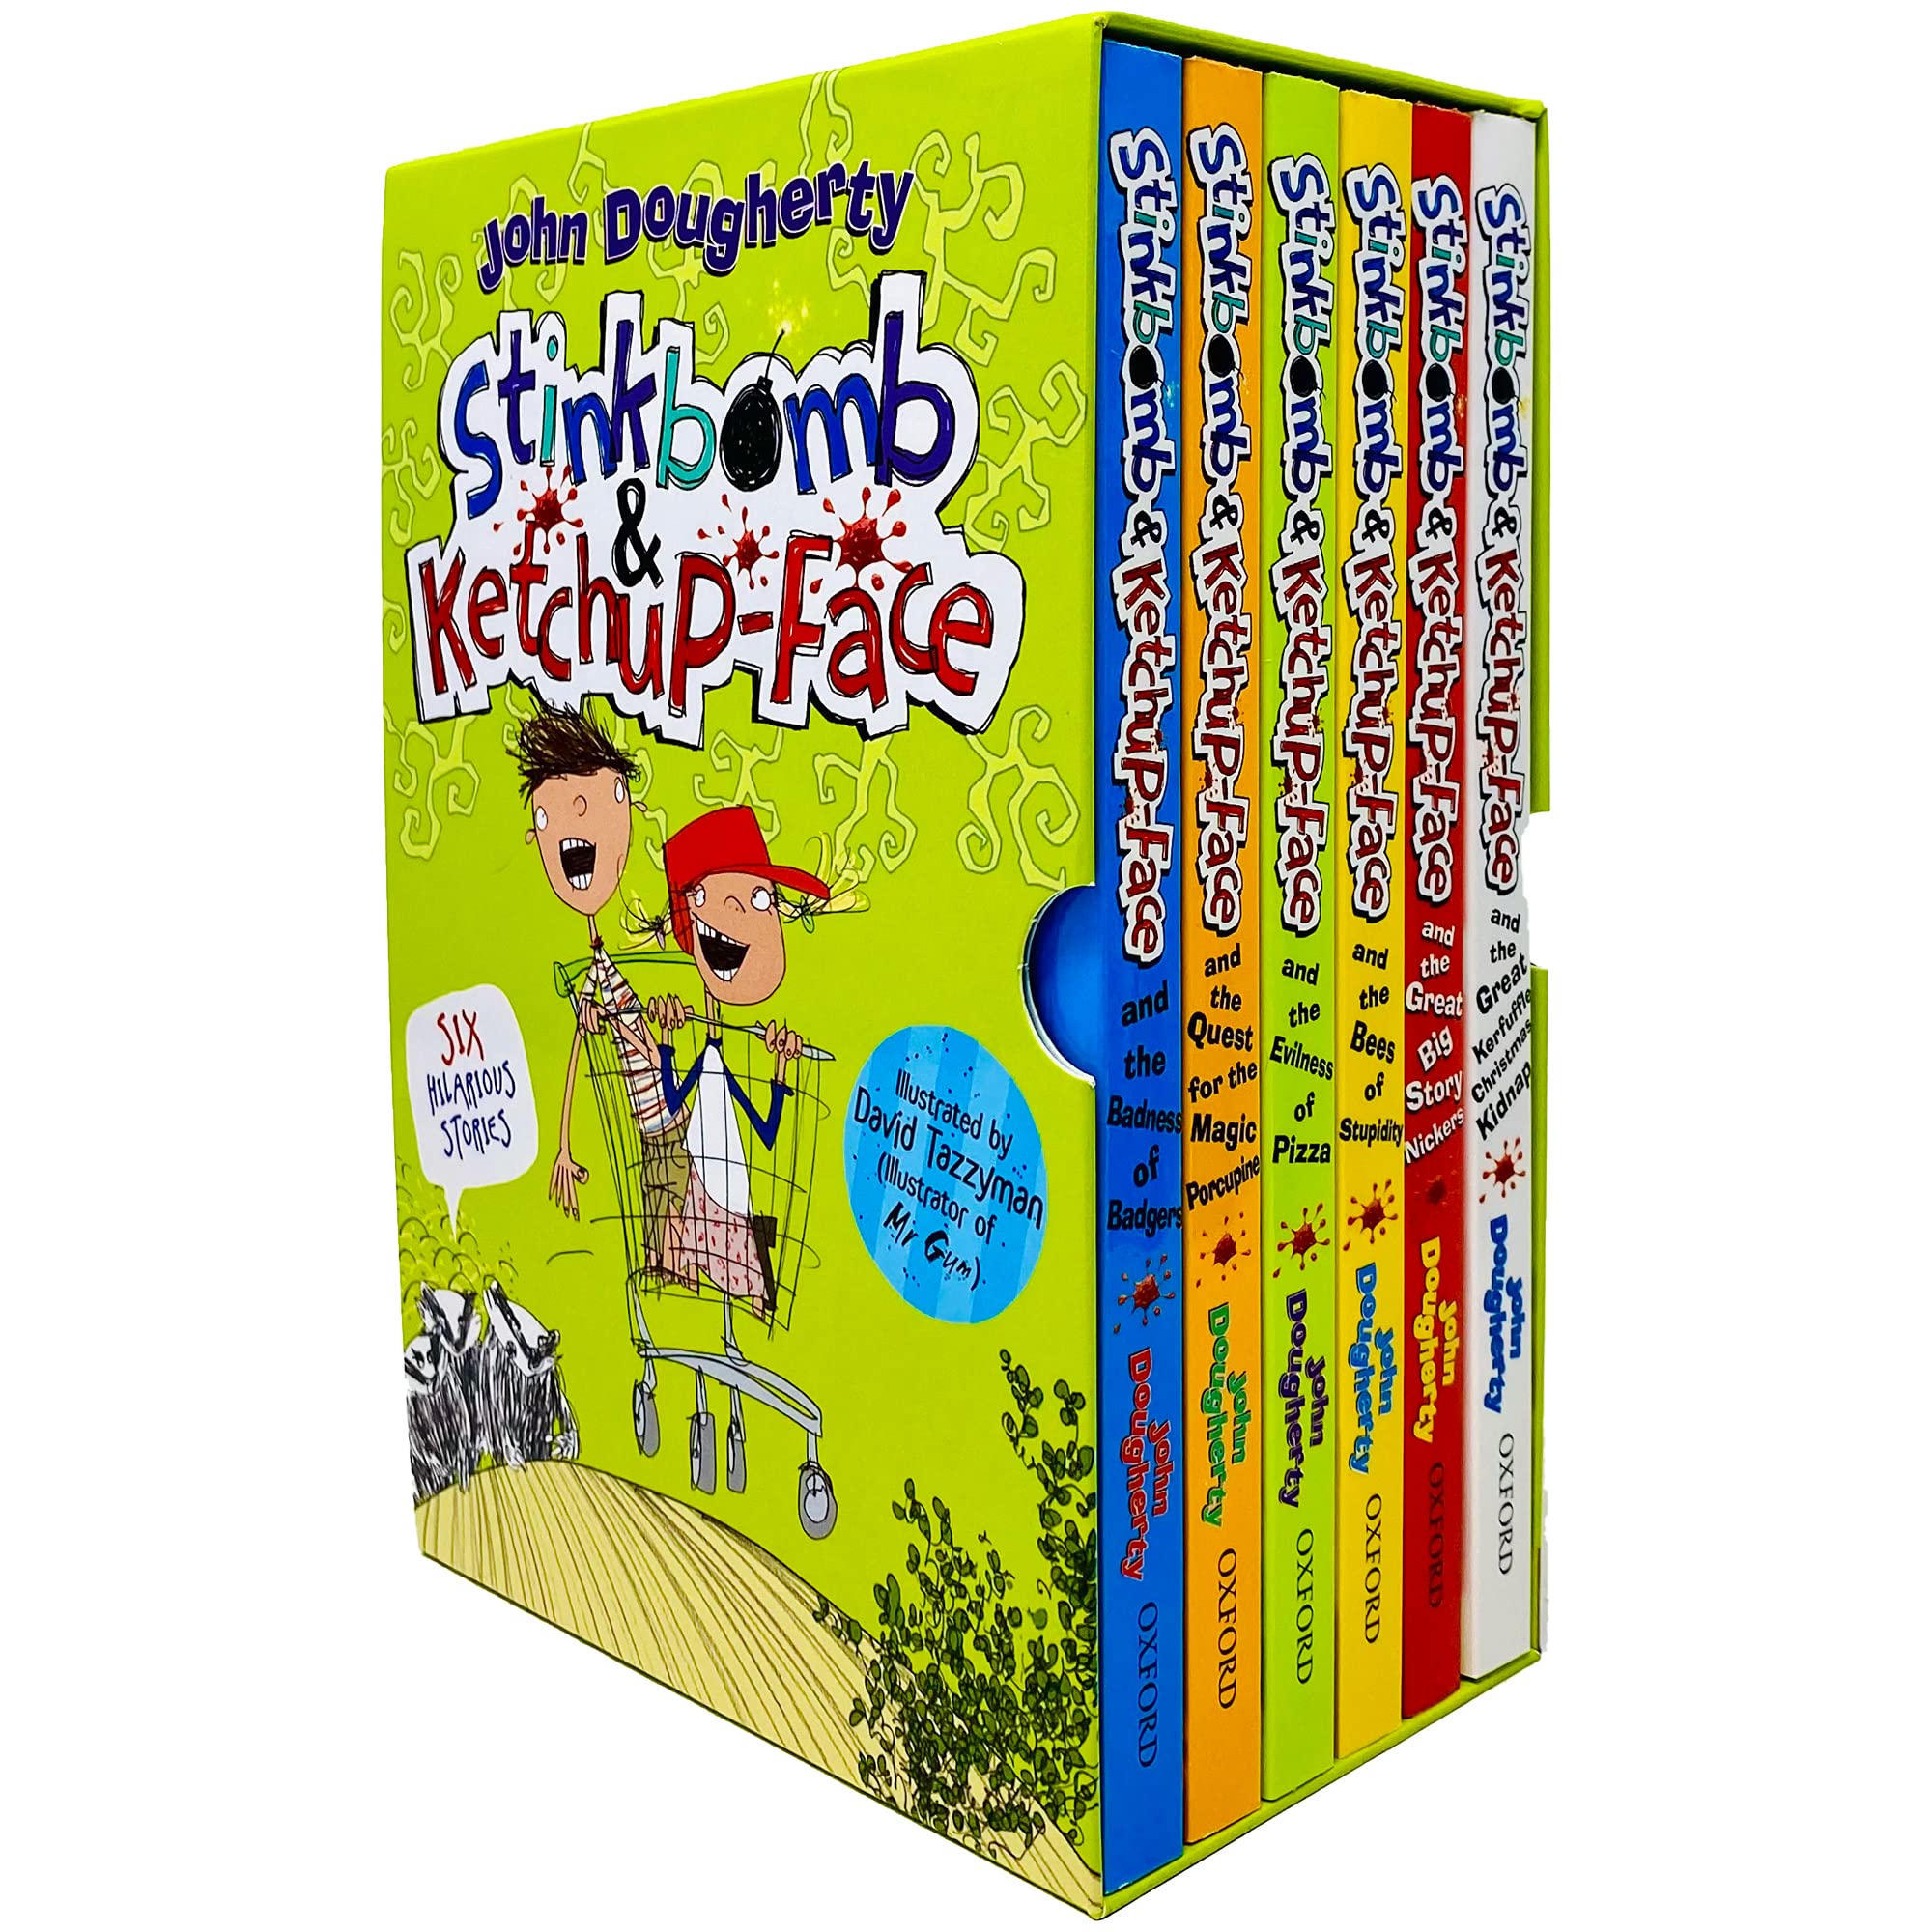 Stinkbomb & Ketchup-Face Series 6 Books Collection Box Set By John Dougherty - Lets Buy Books